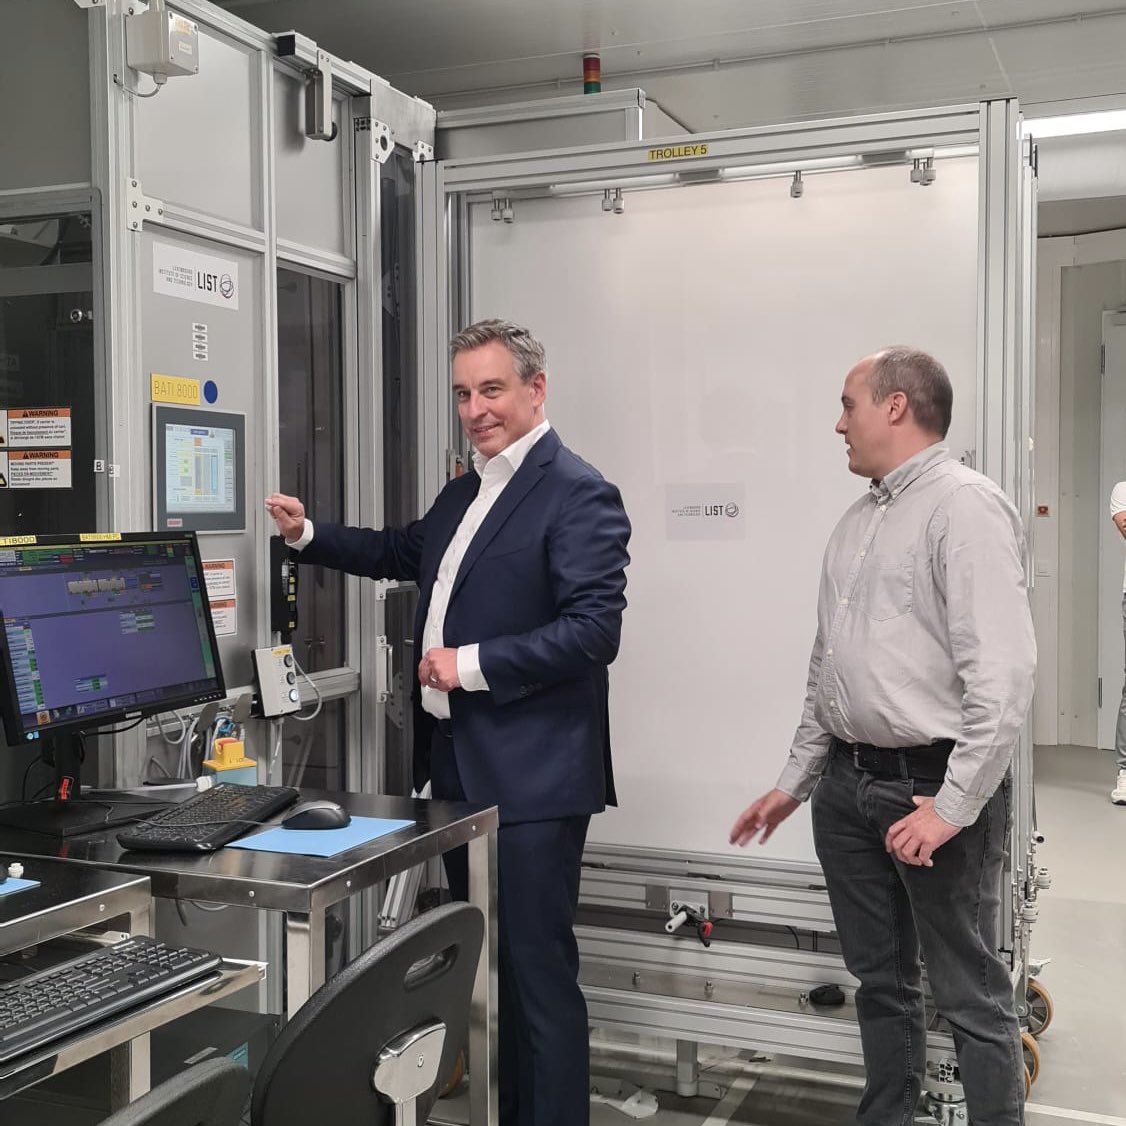 #Coatingtech 📣 Inaugurating a Physical Vapor Deposition pilot line in our Hautcharage labs in the presence of @MeischClaude This 18-metre semi-industrial equipment addresses challenges related to scalability, autonomous manufacturing & #techtransfer